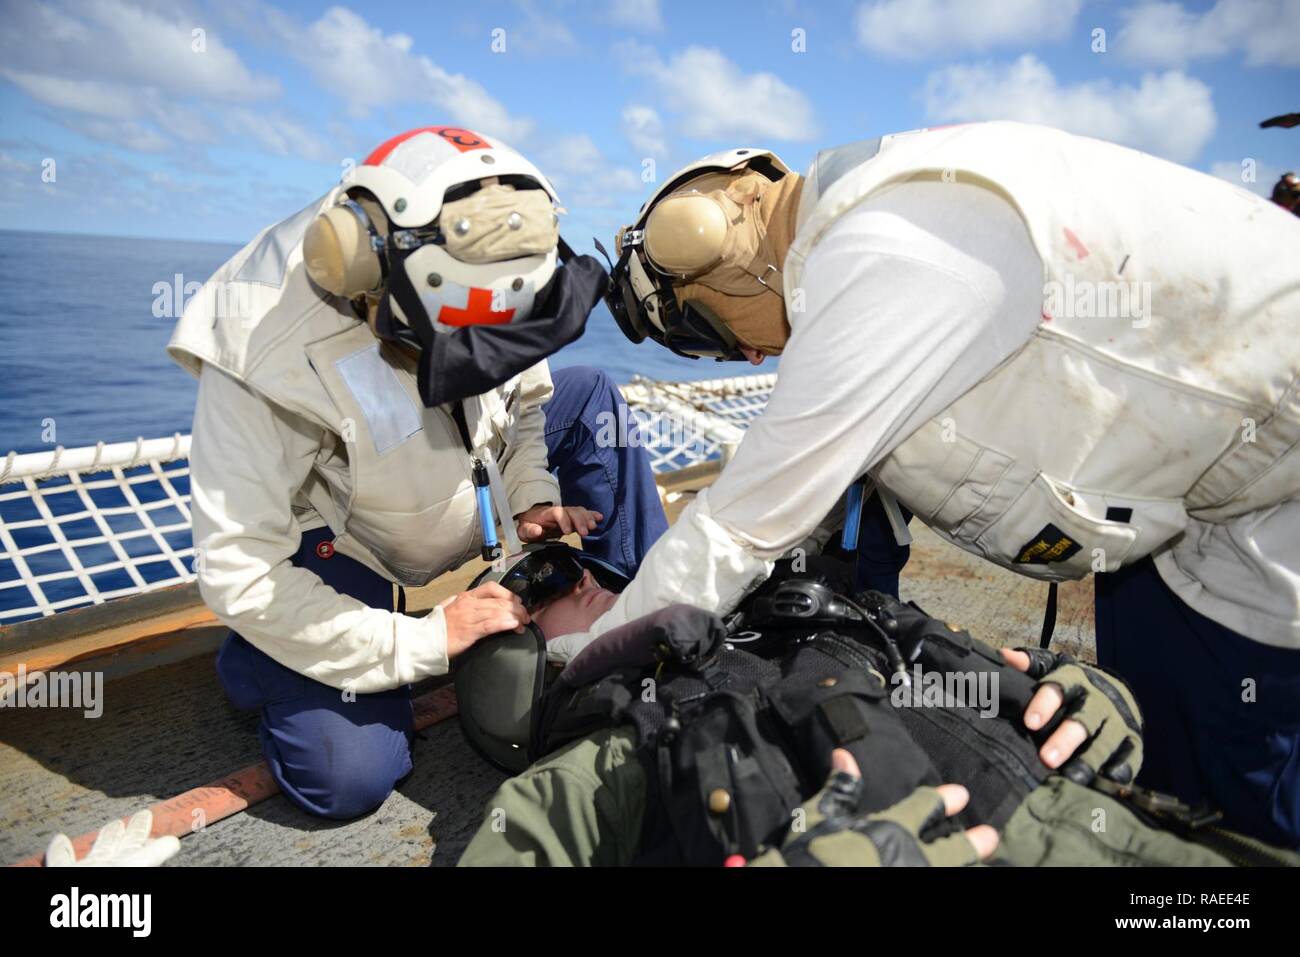 EASTERN PACIFIC OCEAN – Seaman Kristine Kearny (left), a crewmember aboard the Coast Guard Cutter Sherman, removes Lt. Sean O’Dowd’s helmet on Sherman’s flight deck during a helicopter-crash-on-deck drill, Jan. 19, 2017. The crew of Sherman is currently deployed in support of counter drug operations. Cutters like Sherman routinely conduct operations from South America to the Bering Sea conducting alien migrant interdiction operations, domestic fisheries protection, search and rescue, counter-narcotics and other Coast Guard missions at great distances from shore keeping threats far from the U.S Stock Photo